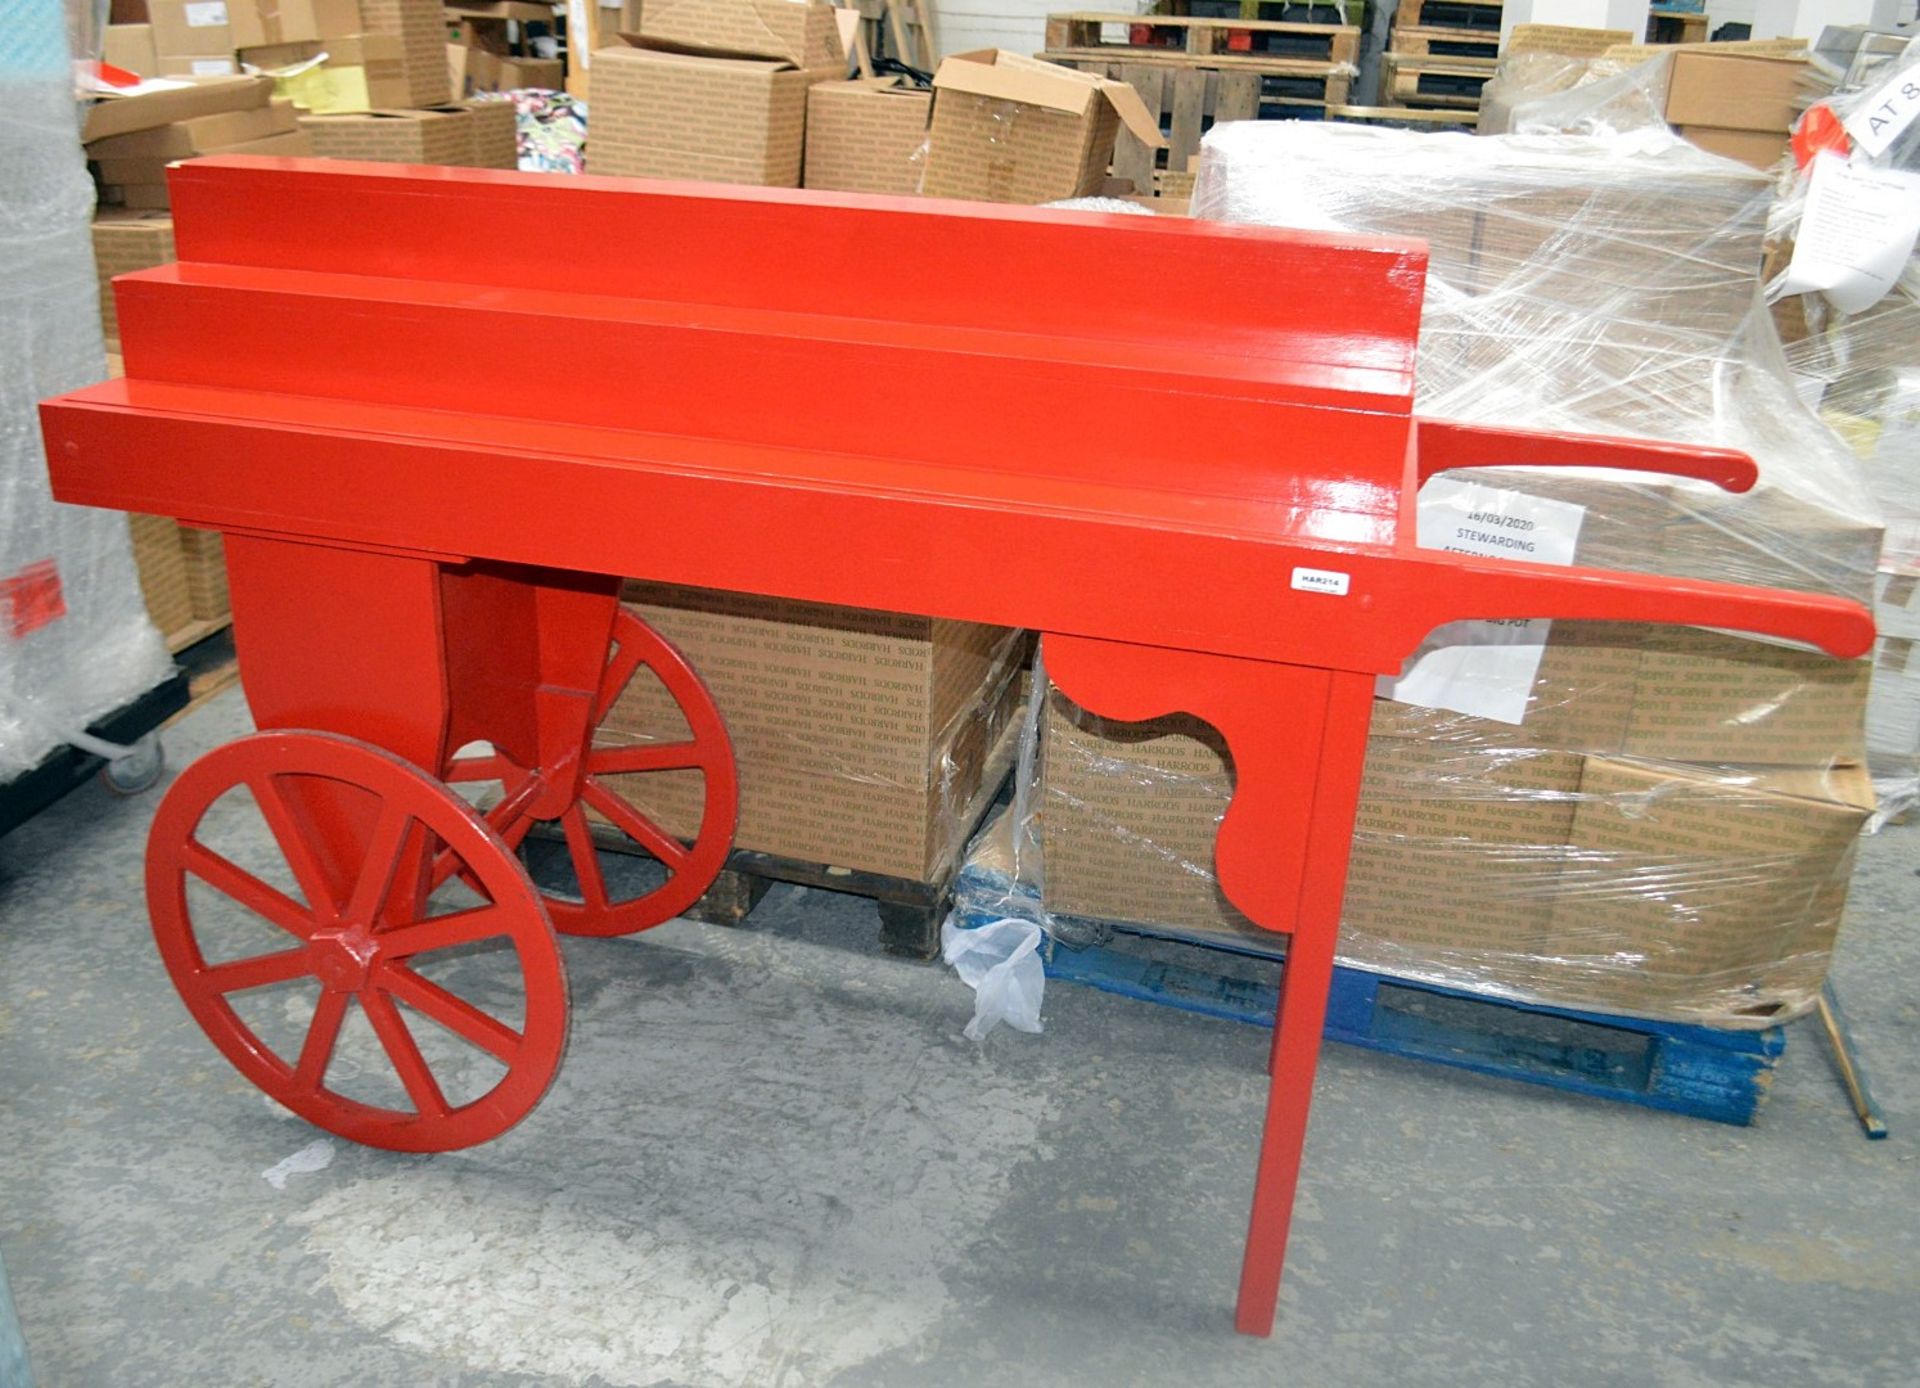 1 x NOOK Bespoke Wooden Display Retail Cart In Red - British Made - Dimensions: H120 x W190 x D68cm